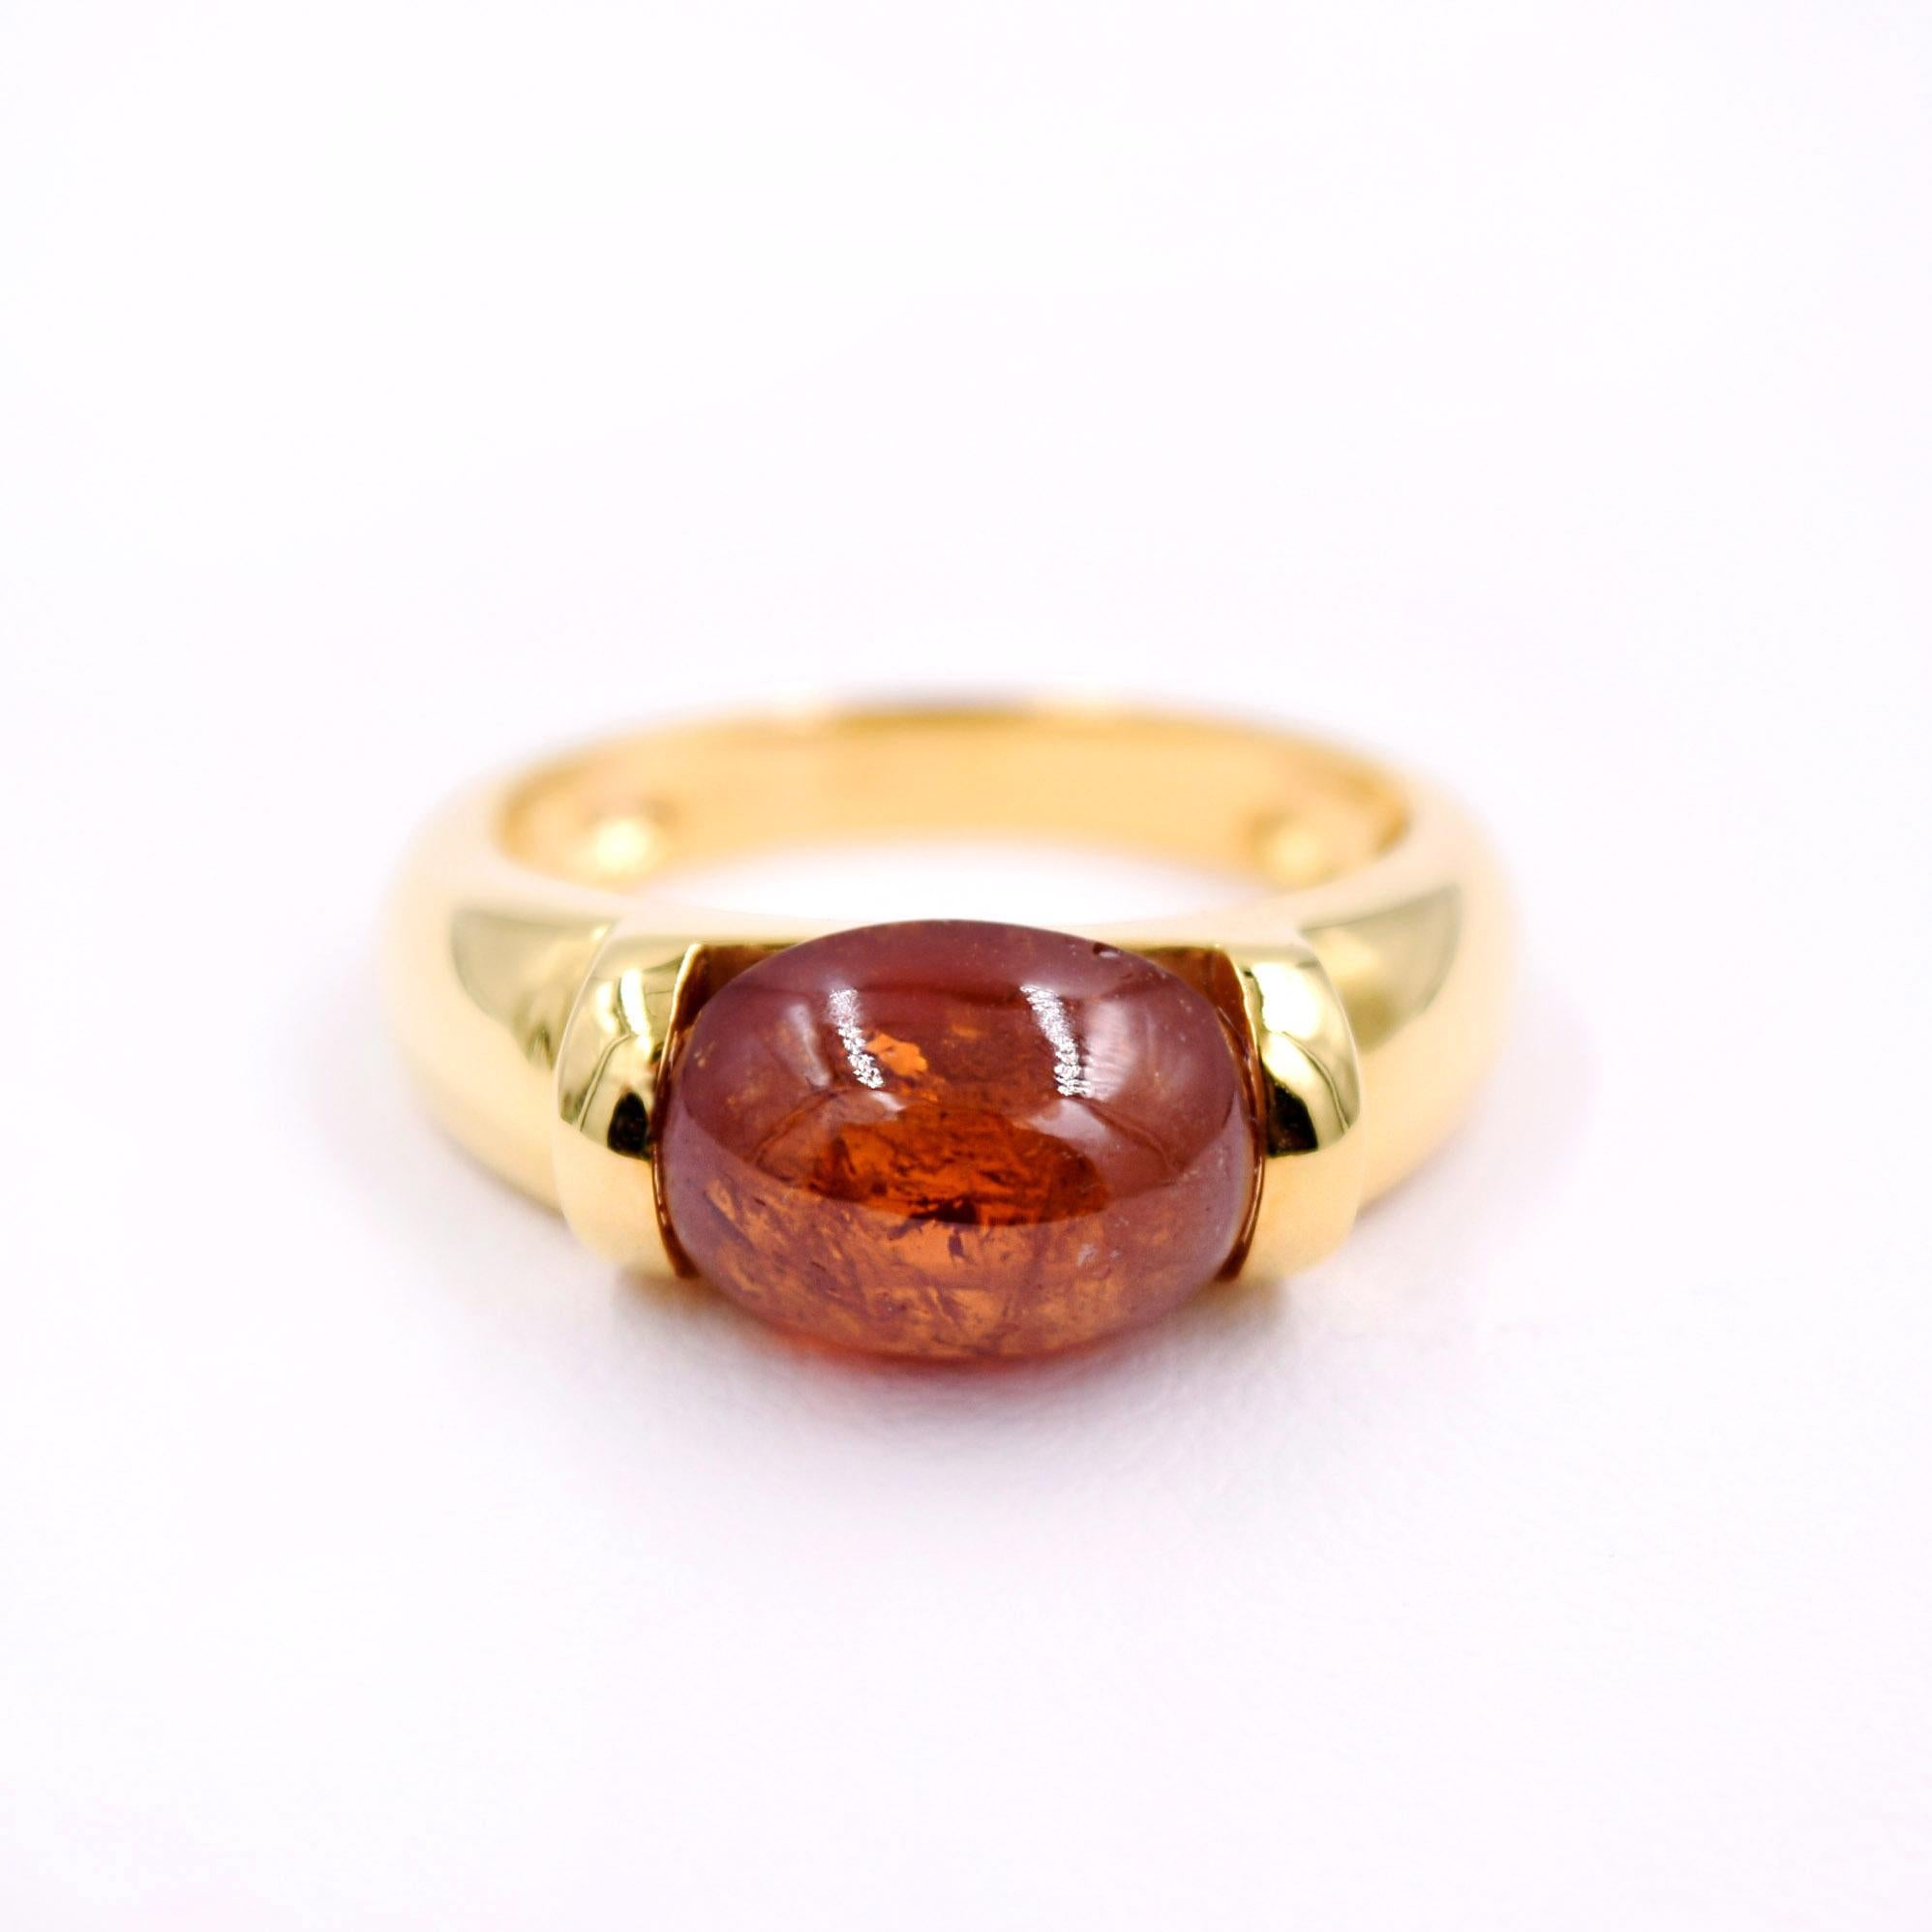 - Kanwar Creations Spessartite Ring
- 18 Karat Yellow Gold
- Ring comes in Size 6.5 and can be sized